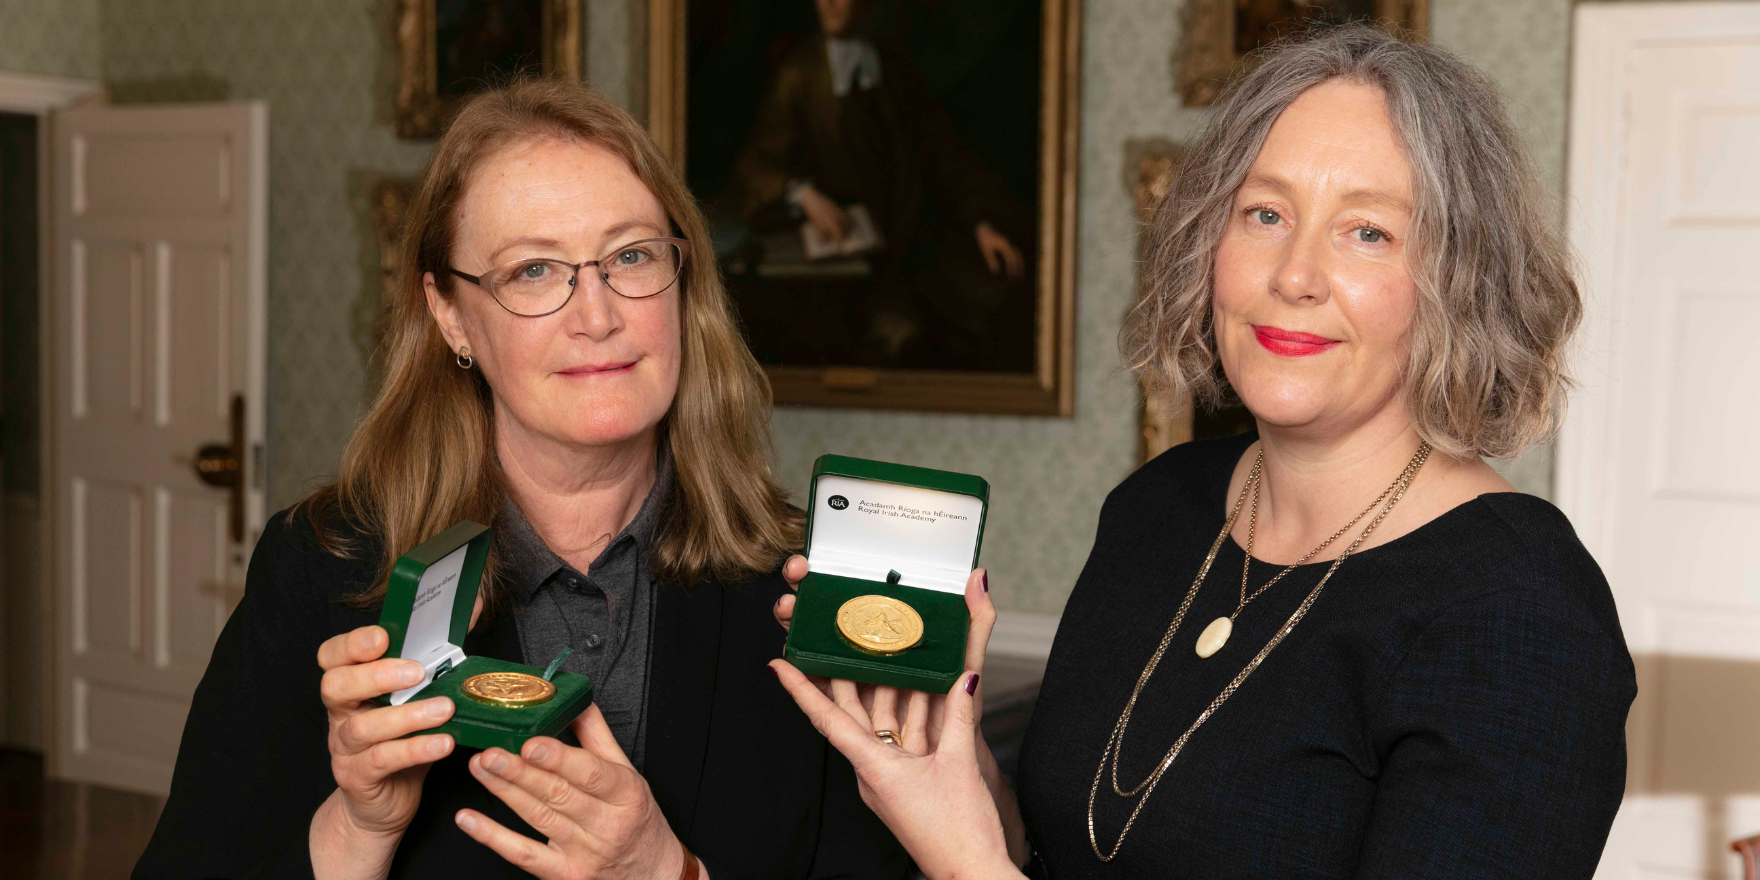 Two women (Ruth M.J. Byrne MRIA on the left and Jennifer C. McElwain MRIA on the right) pose for a photograph (from the shoulders up) with their RIA Gold Medals in a green case, held in both their hands. Ruth M.J. Byrne MRIA is wearing glasses and has shoulder-length strawberry blonde hair. She is wearing a grey shirt and black blazer. Jennifer C. McElwain MRIA has silver curly hair and wears red lipstick. She is wearing black and wears gold jewellery. A painting hangs on a wallpapered wall in the background of the lavish room they stand in.